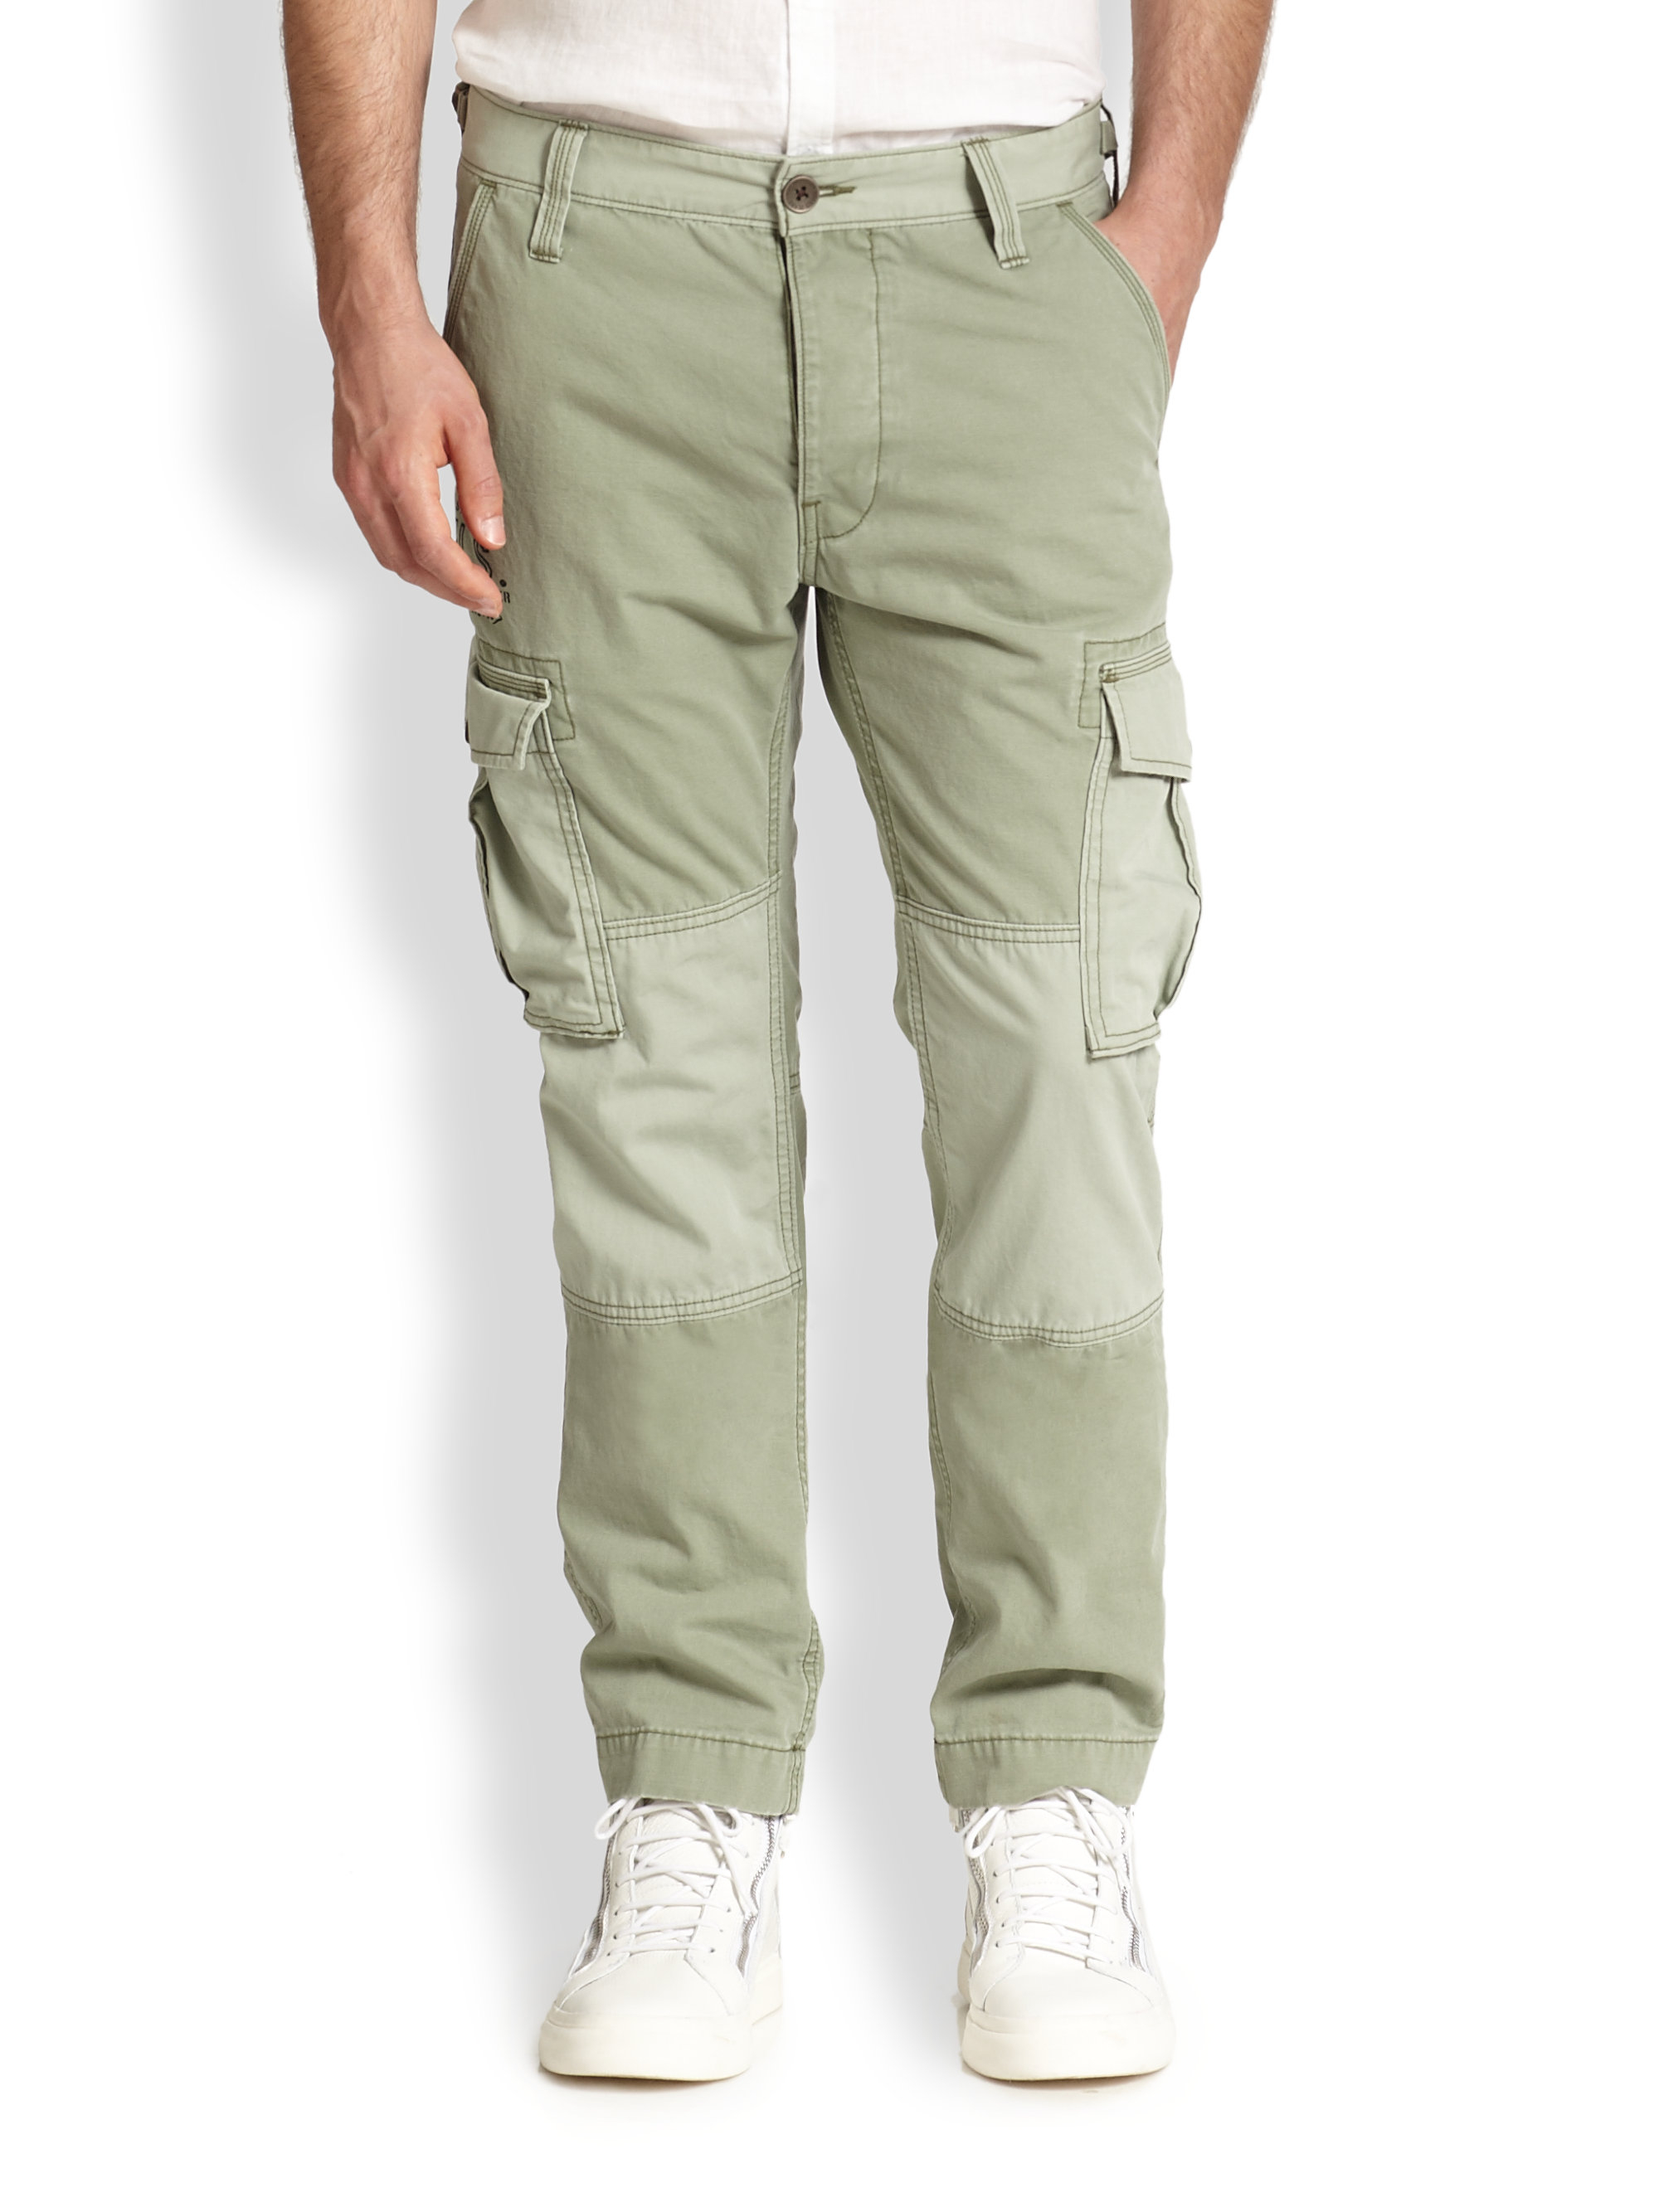 True Religion Special Ops Cargo Pants in Green for Men - Lyst